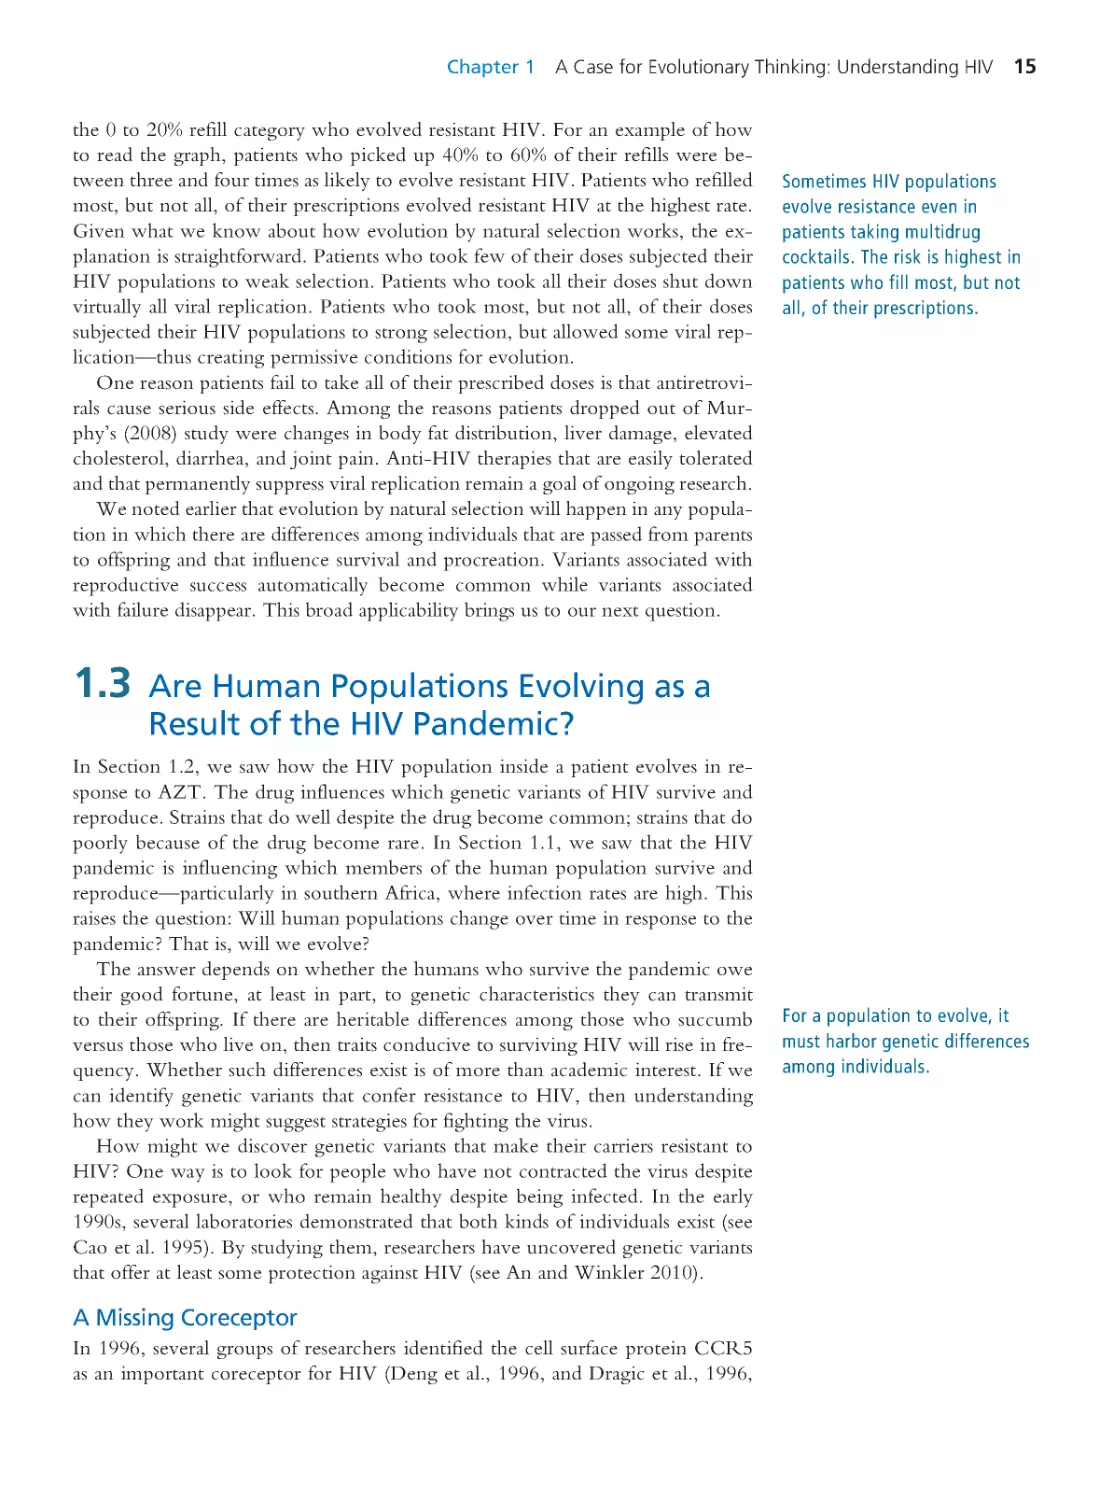 1.3 Are Human Populations Evolving as a Result of the HIV Pandemic?